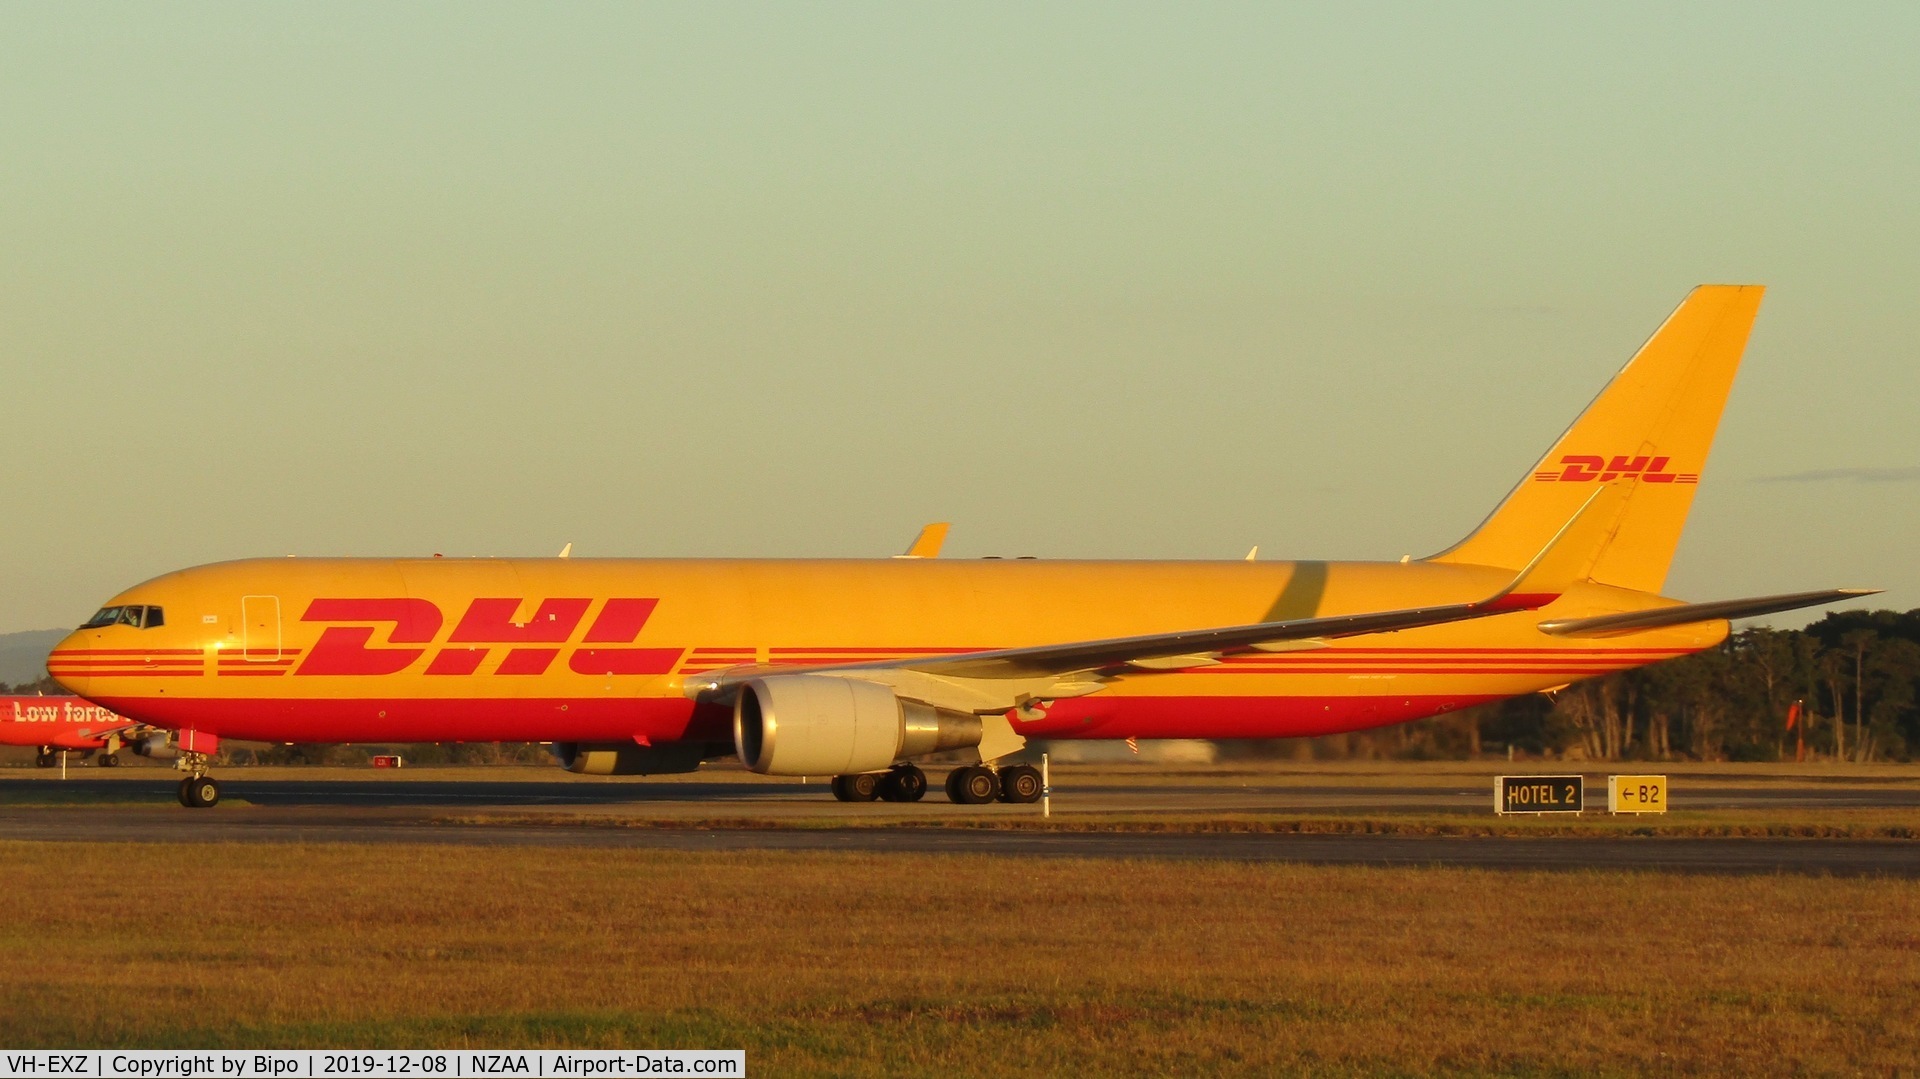 VH-EXZ, 2012 Boeing 767-3JH/F/ER C/N 37808, Taxiing out to the DHL/Tasman Cargo apron after arrival from Sydney.